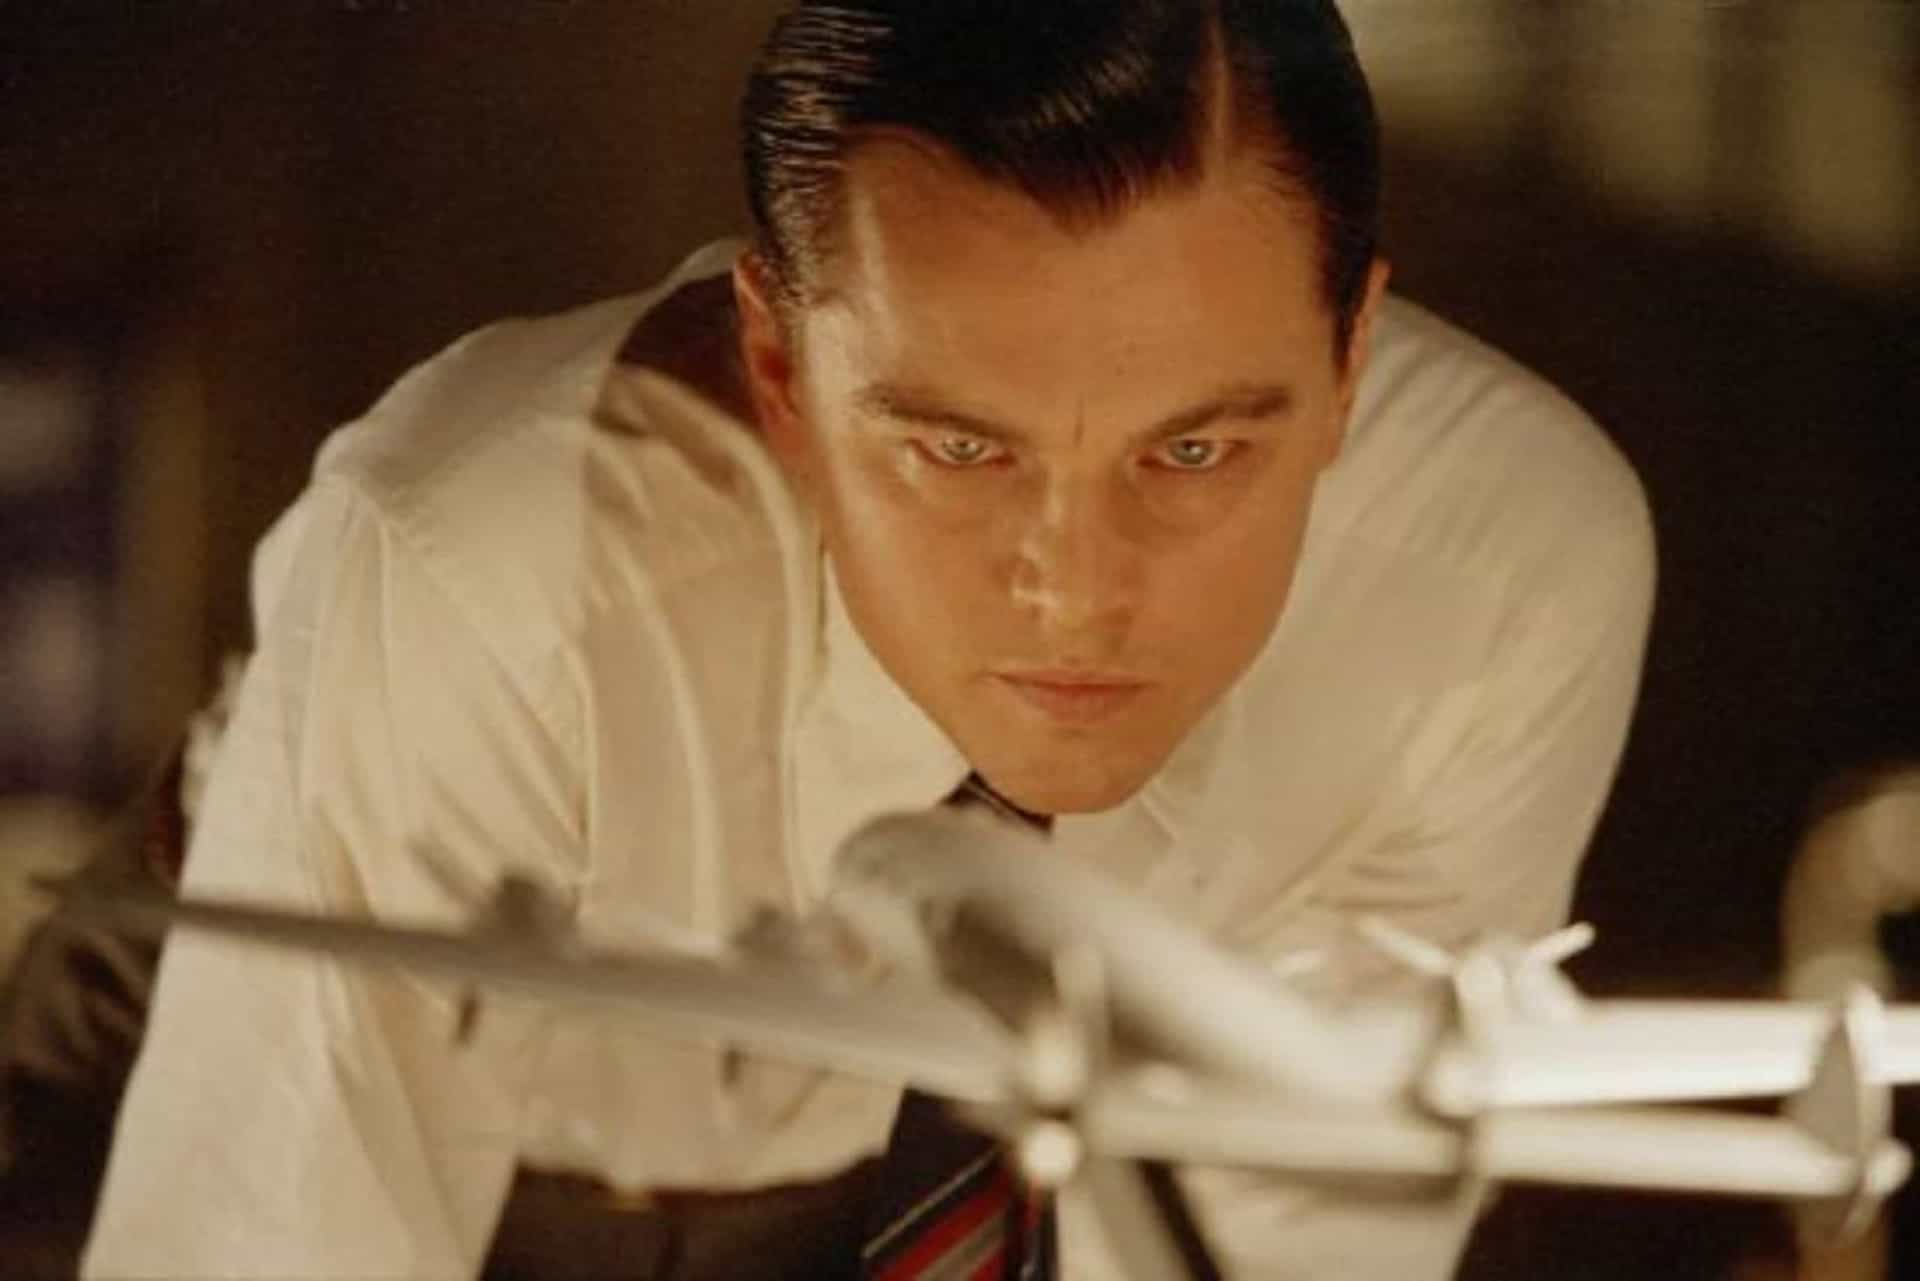 <p>This Martin Scorsese movie is about the life of record-setting pilot and business magnate Howard Hughes (Leonardo DiCaprio).</p><p>You may also like:<a href="https://www.starsinsider.com/n/375558?utm_source=msn.com&utm_medium=display&utm_campaign=referral_description&utm_content=519875en-us"> The visionary world of Elon Musk</a></p>